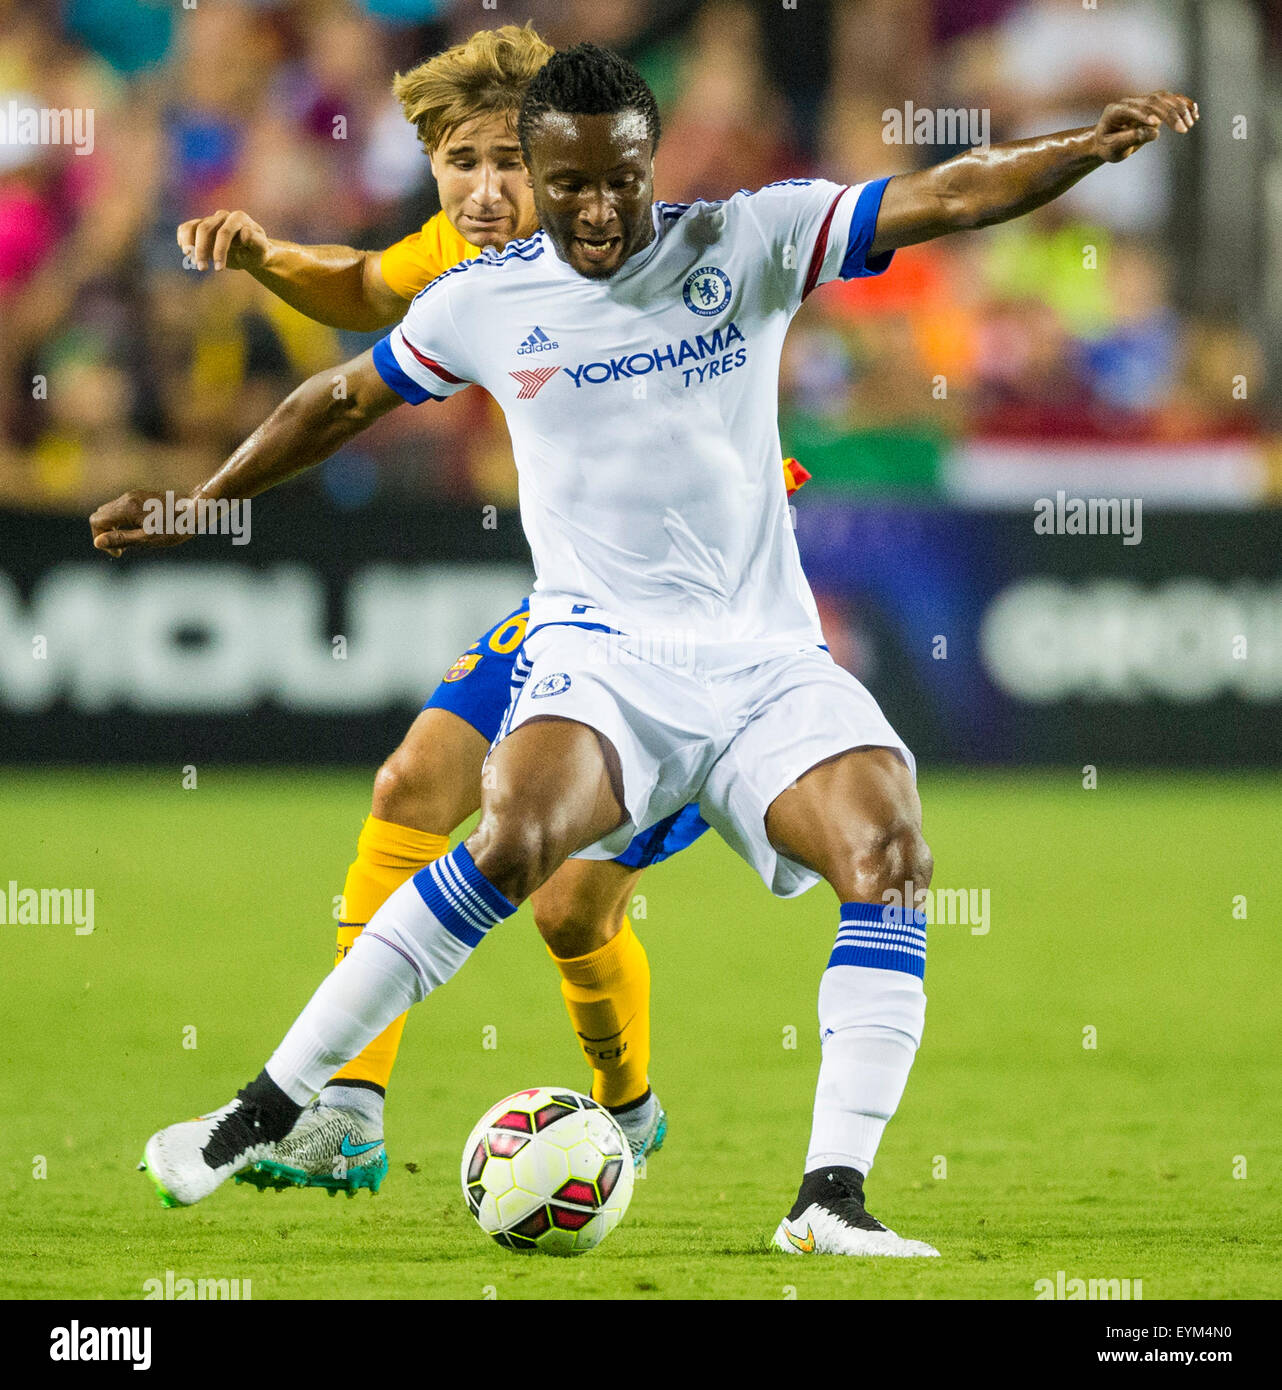 Landover, MD, USA. 28th July, 2015. #12 Chelsea M John Obi Mikel during the International Champions Cup match between Chelsea FC and FC Barcelona at FedEx Field in Landover, MD. Jacob Kupferman/CSM/Alamy Live News Stock Photo